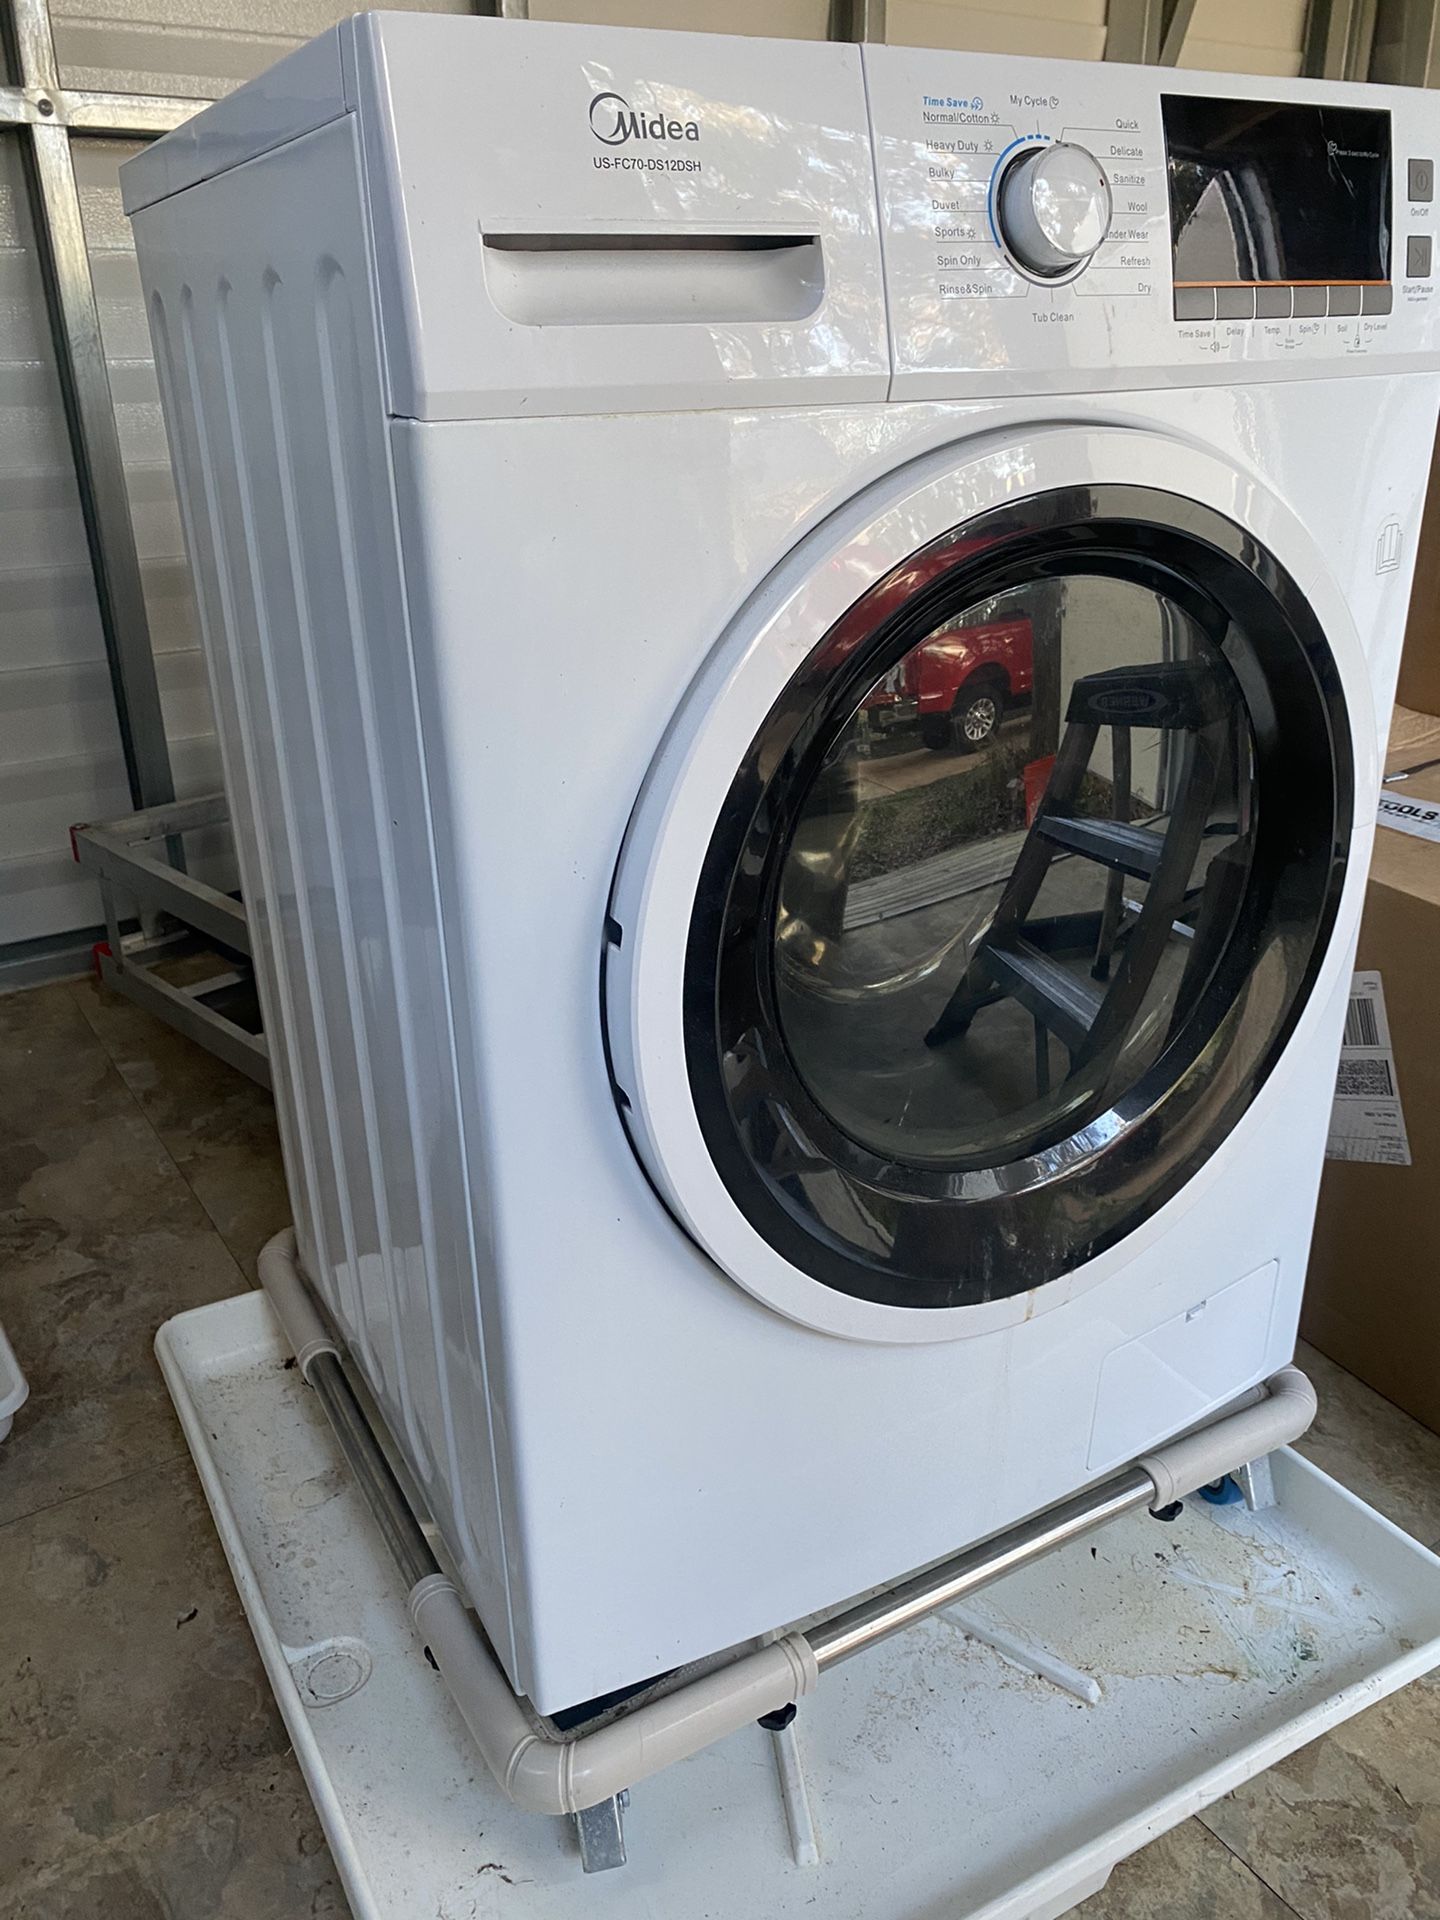 RV Washer/dryer combo all in one, RV or Apt laundry Midea 120v 2.4cu ft